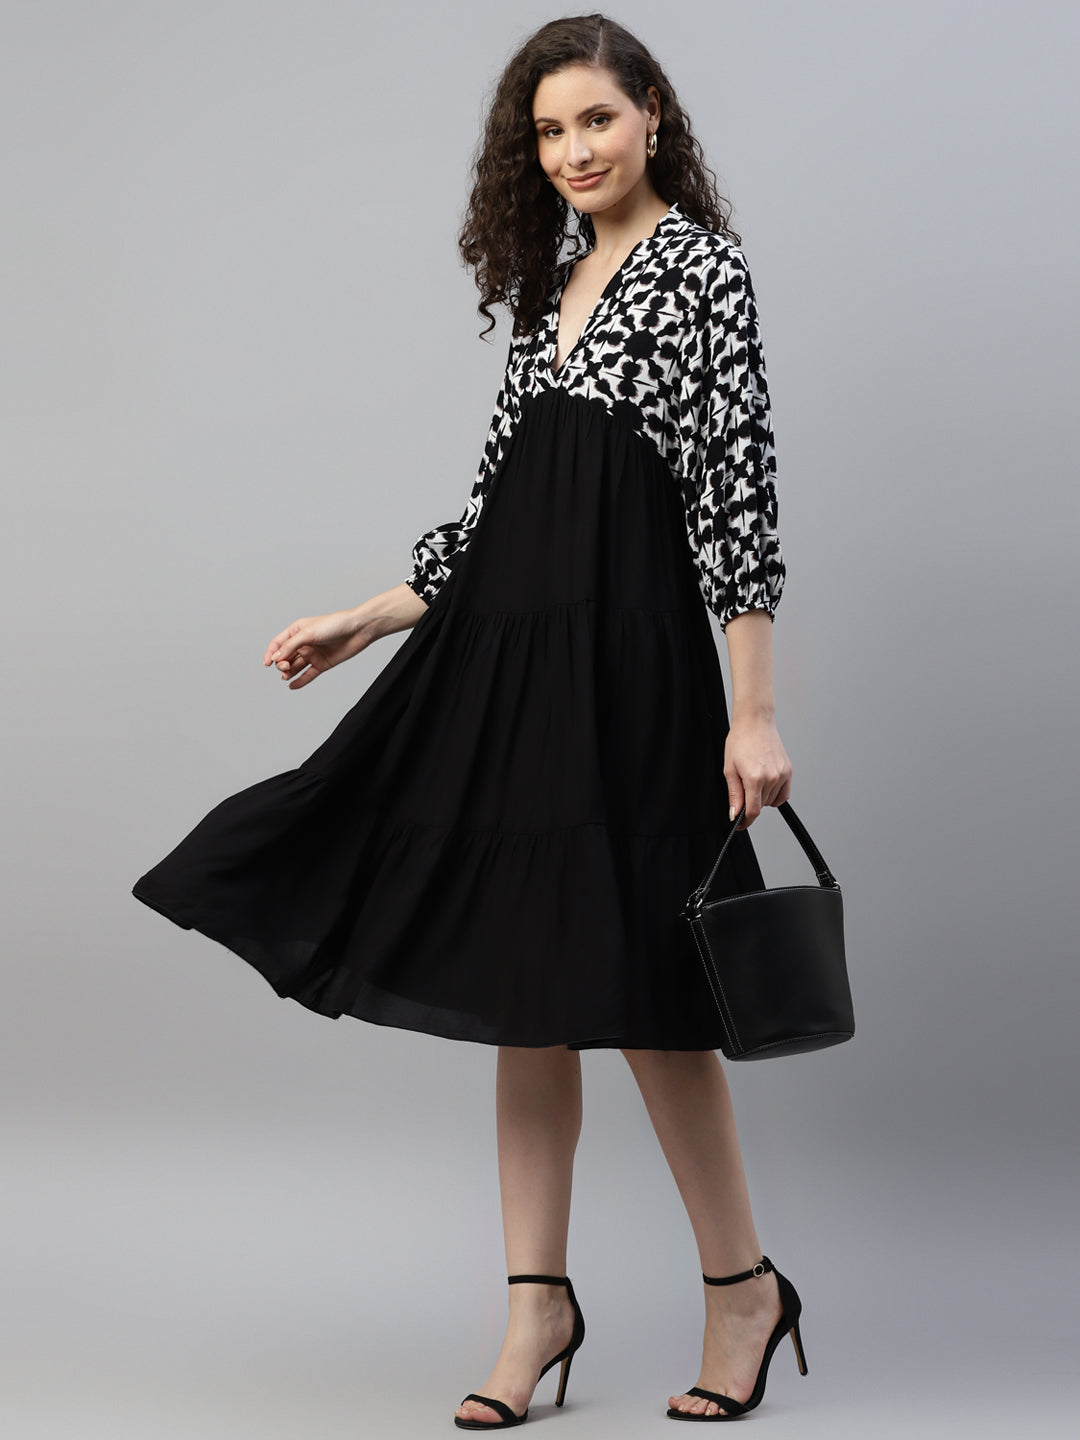 Geometrical Printed With Black Women's Tiered Dress